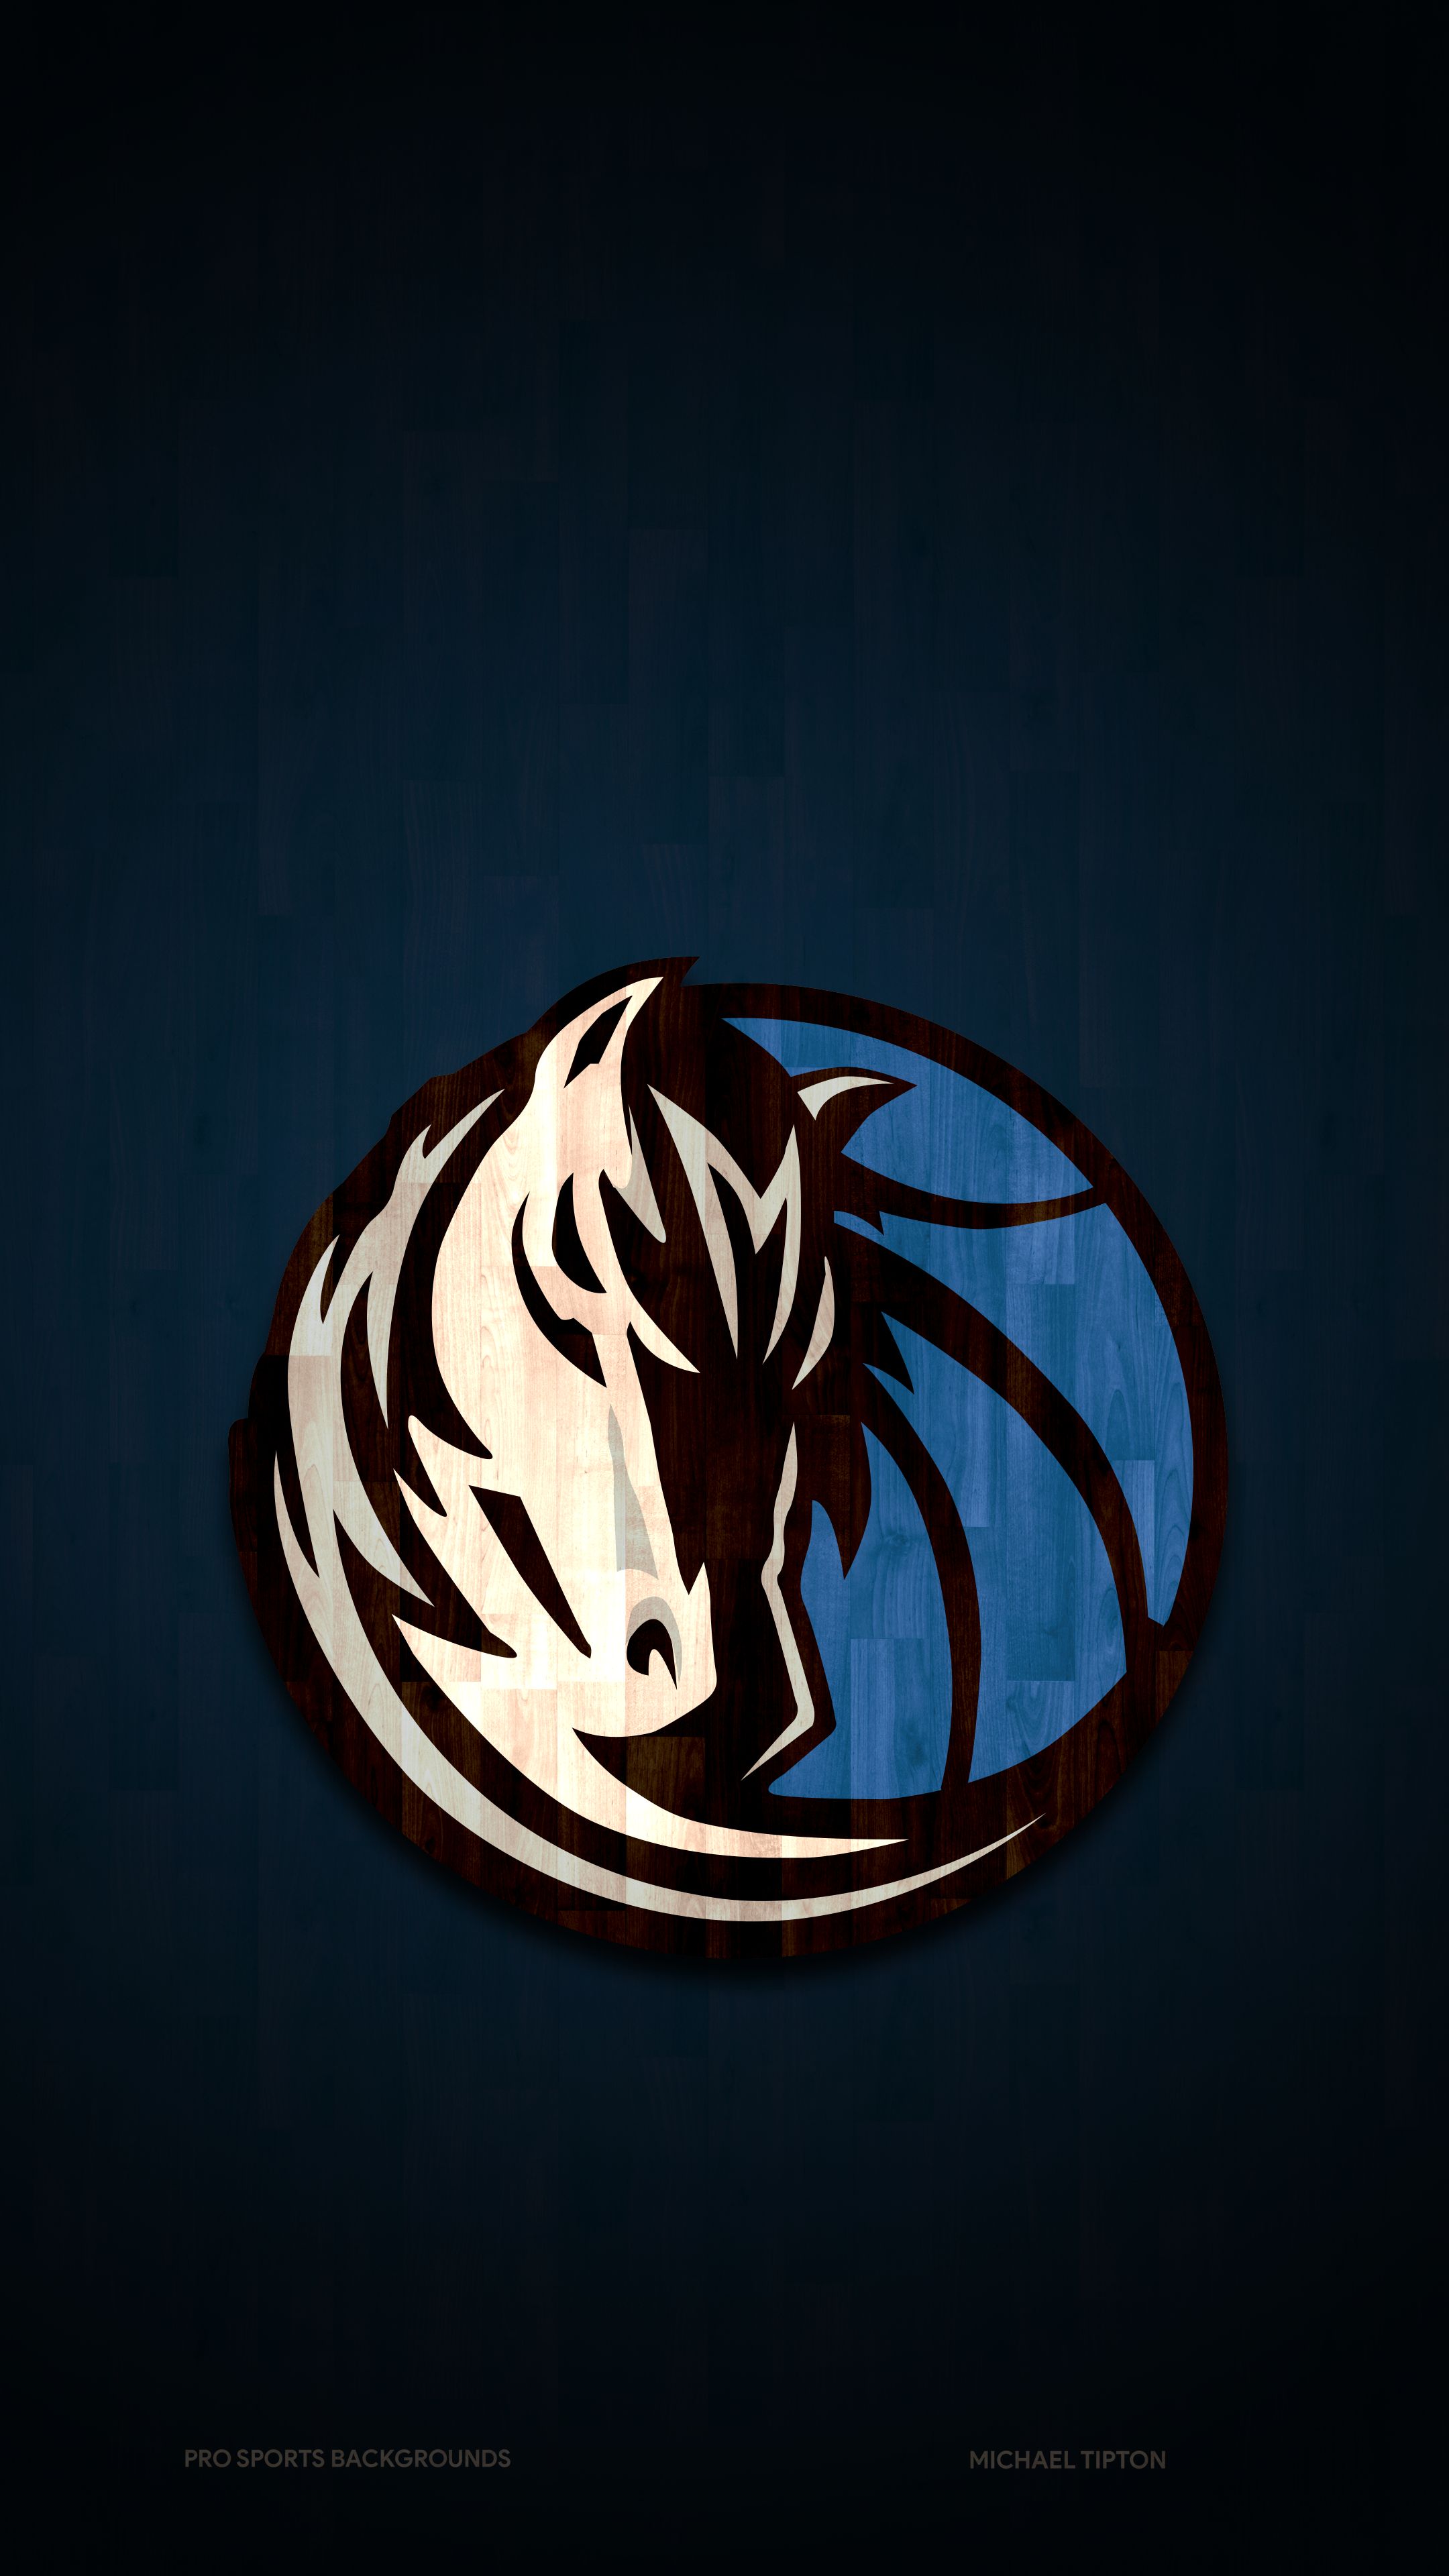 – Get the latest HD and mobile NBA wallpapers today!  Dallas Mavericks Archives -  - Get the latest HD and  mobile NBA wallpapers today!